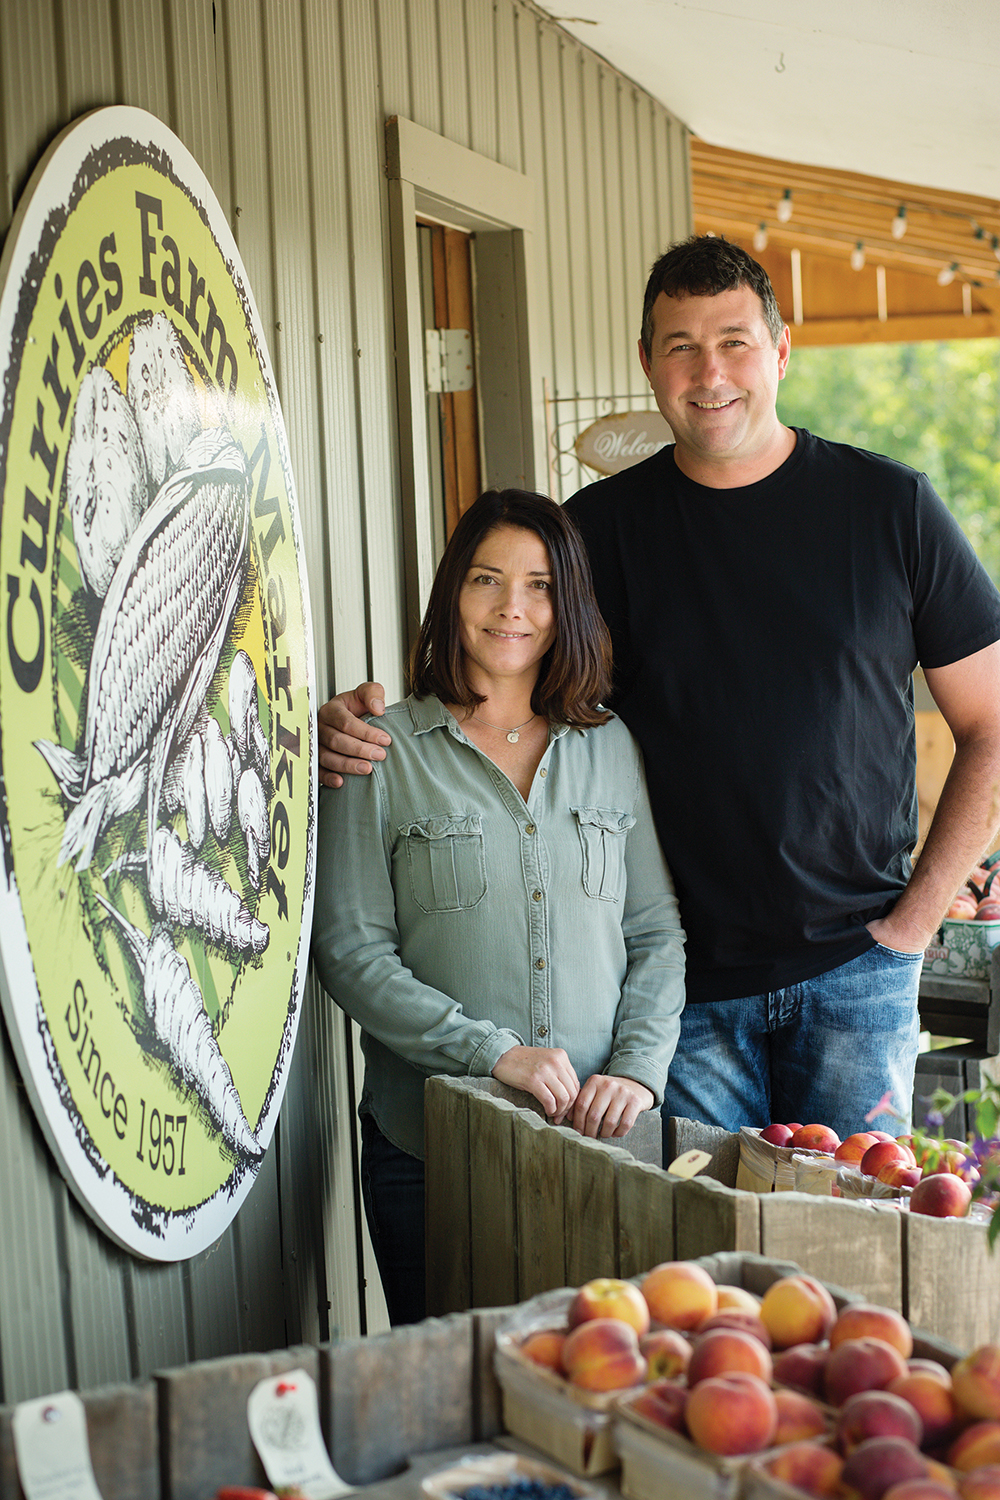 Candice and Chris Currie took over the farm and market from Chris’s dad, Alvin, seven years ago.